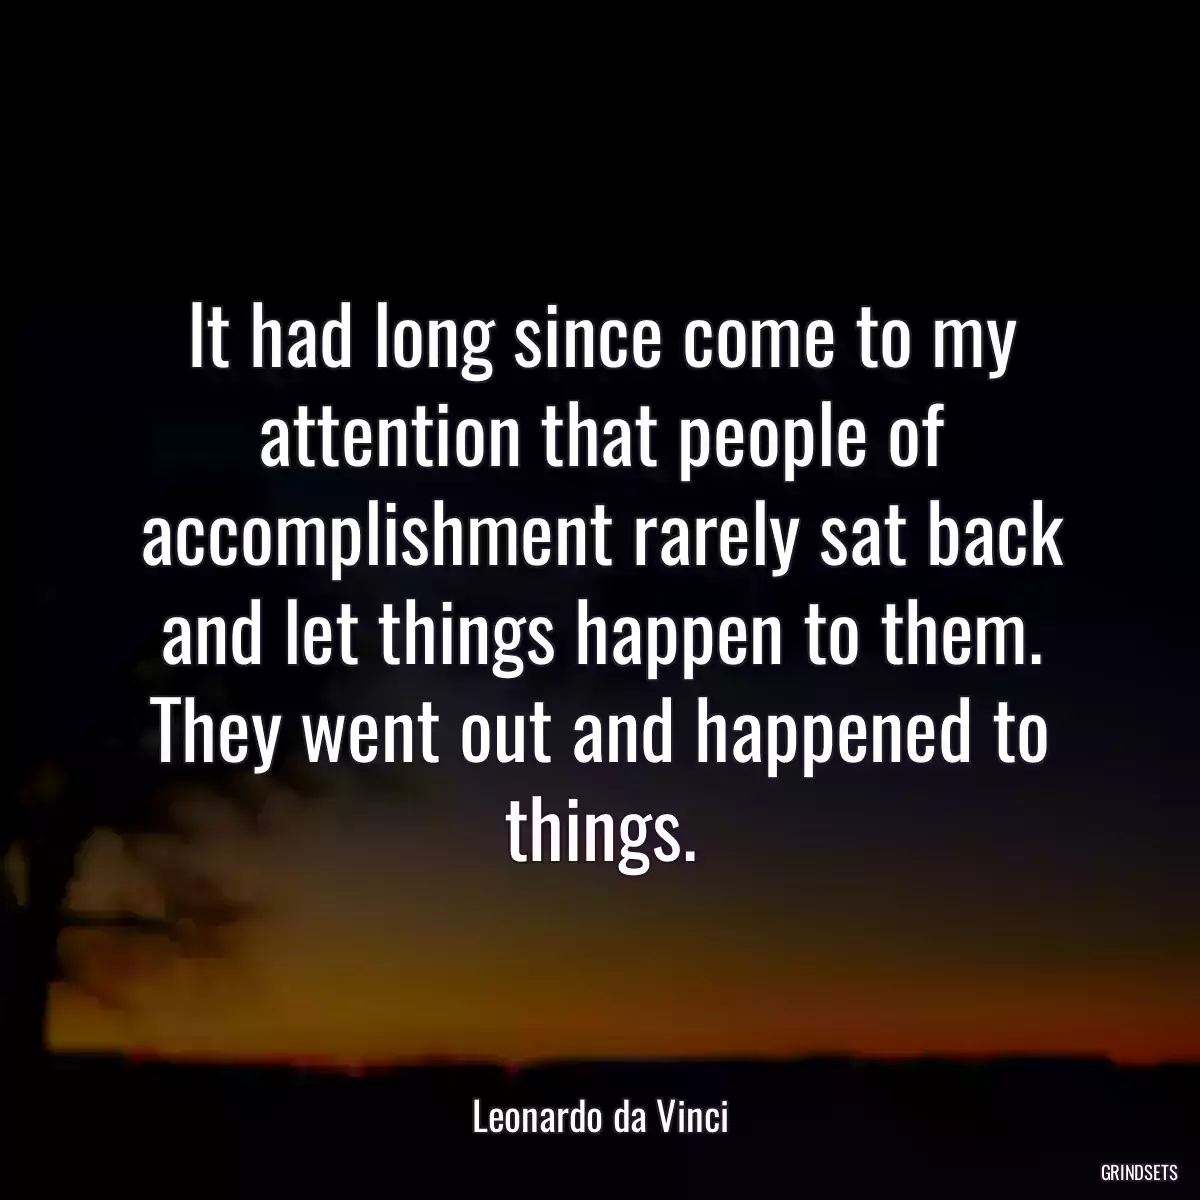 It had long since come to my attention that people of accomplishment rarely sat back and let things happen to them. They went out and happened to things.